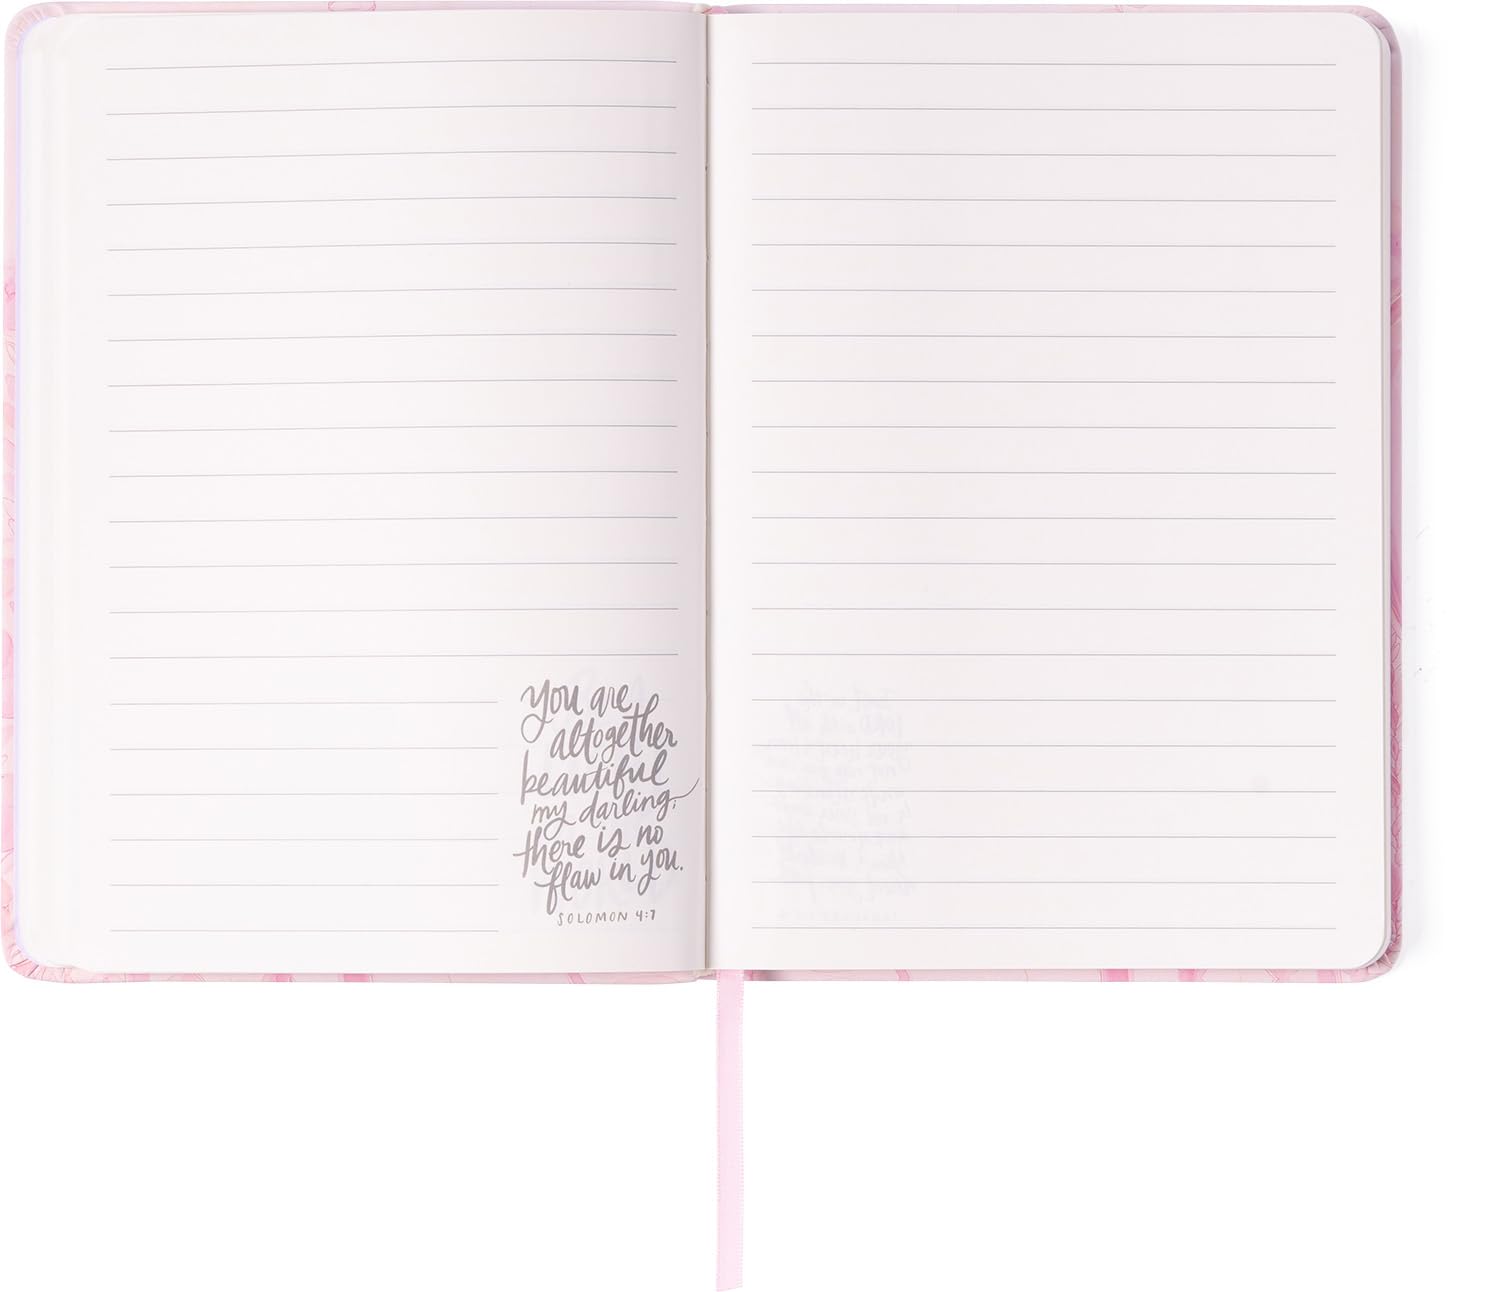 256 Pages Pink Notebook Journal